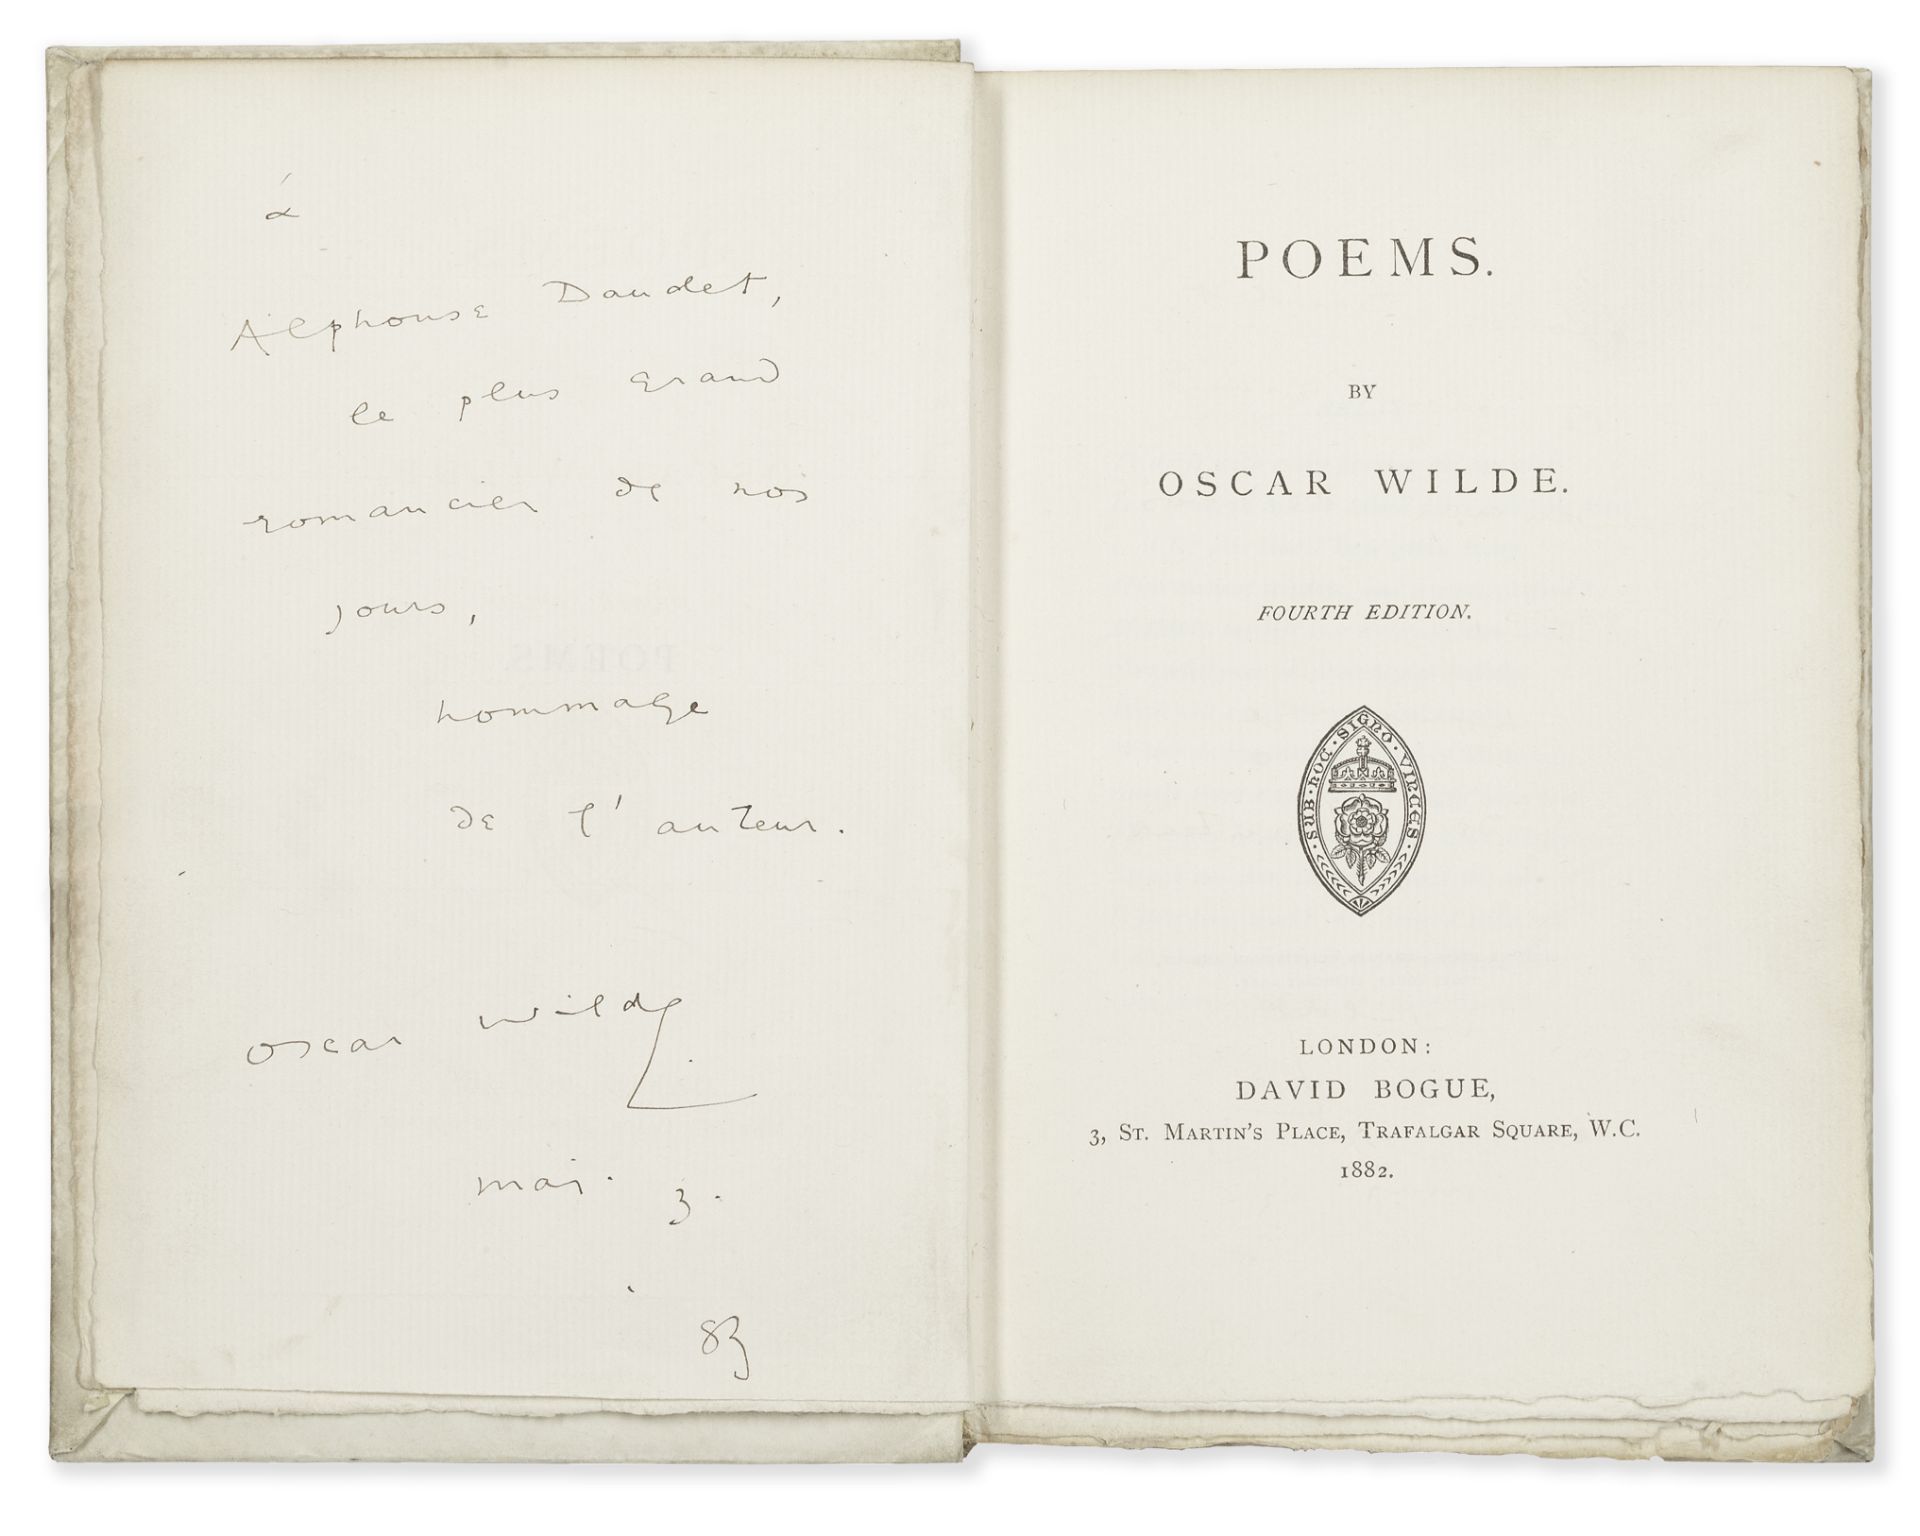 WILDE (OSCAR) Poems... Fourth Edition, [ONE OF 250 COPIES], AUTHOR'S PRESENTATION COPY TO ALPHONS...